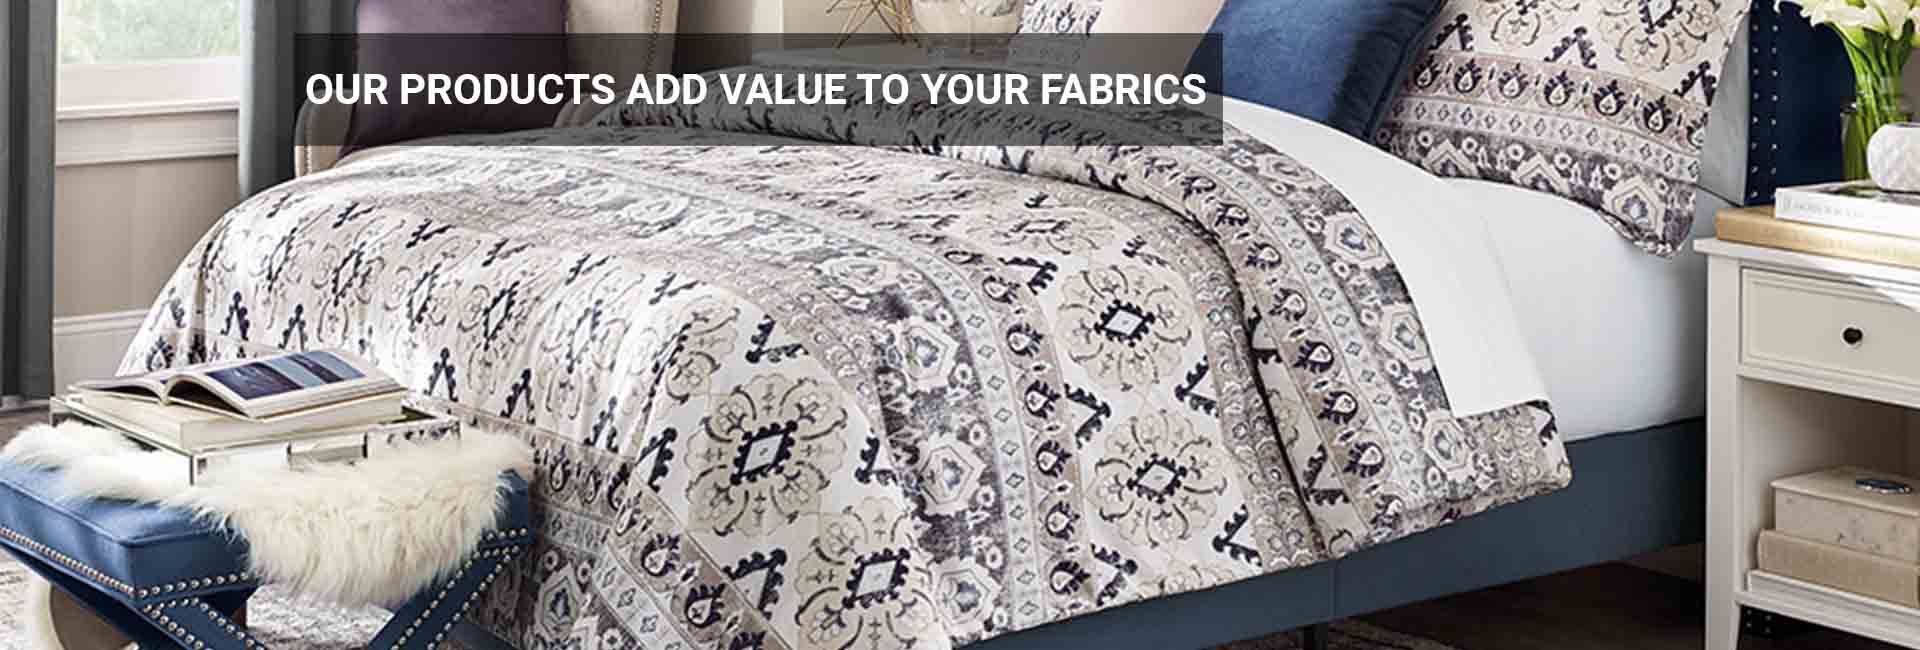 Our products add value to your fabrics